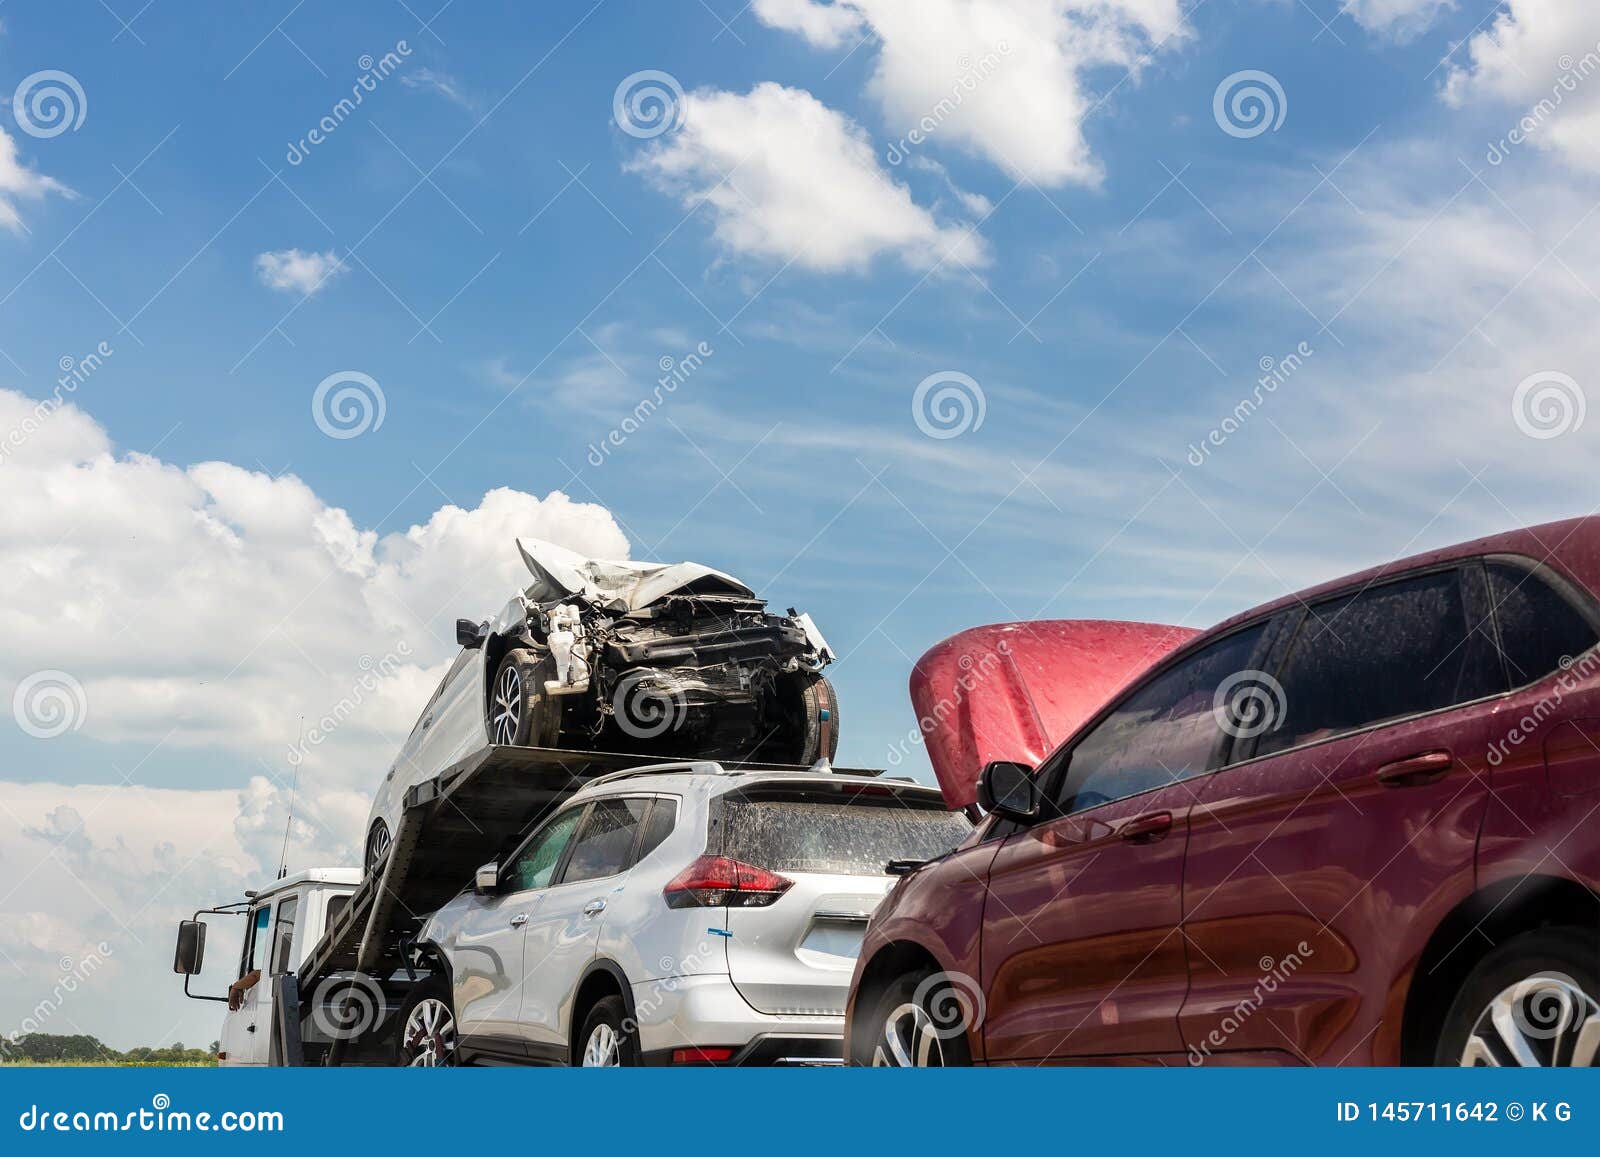 tow truck trailer on highway carrying three damaged cars sold on insurance car auctions for repair and recovery.  vehicles